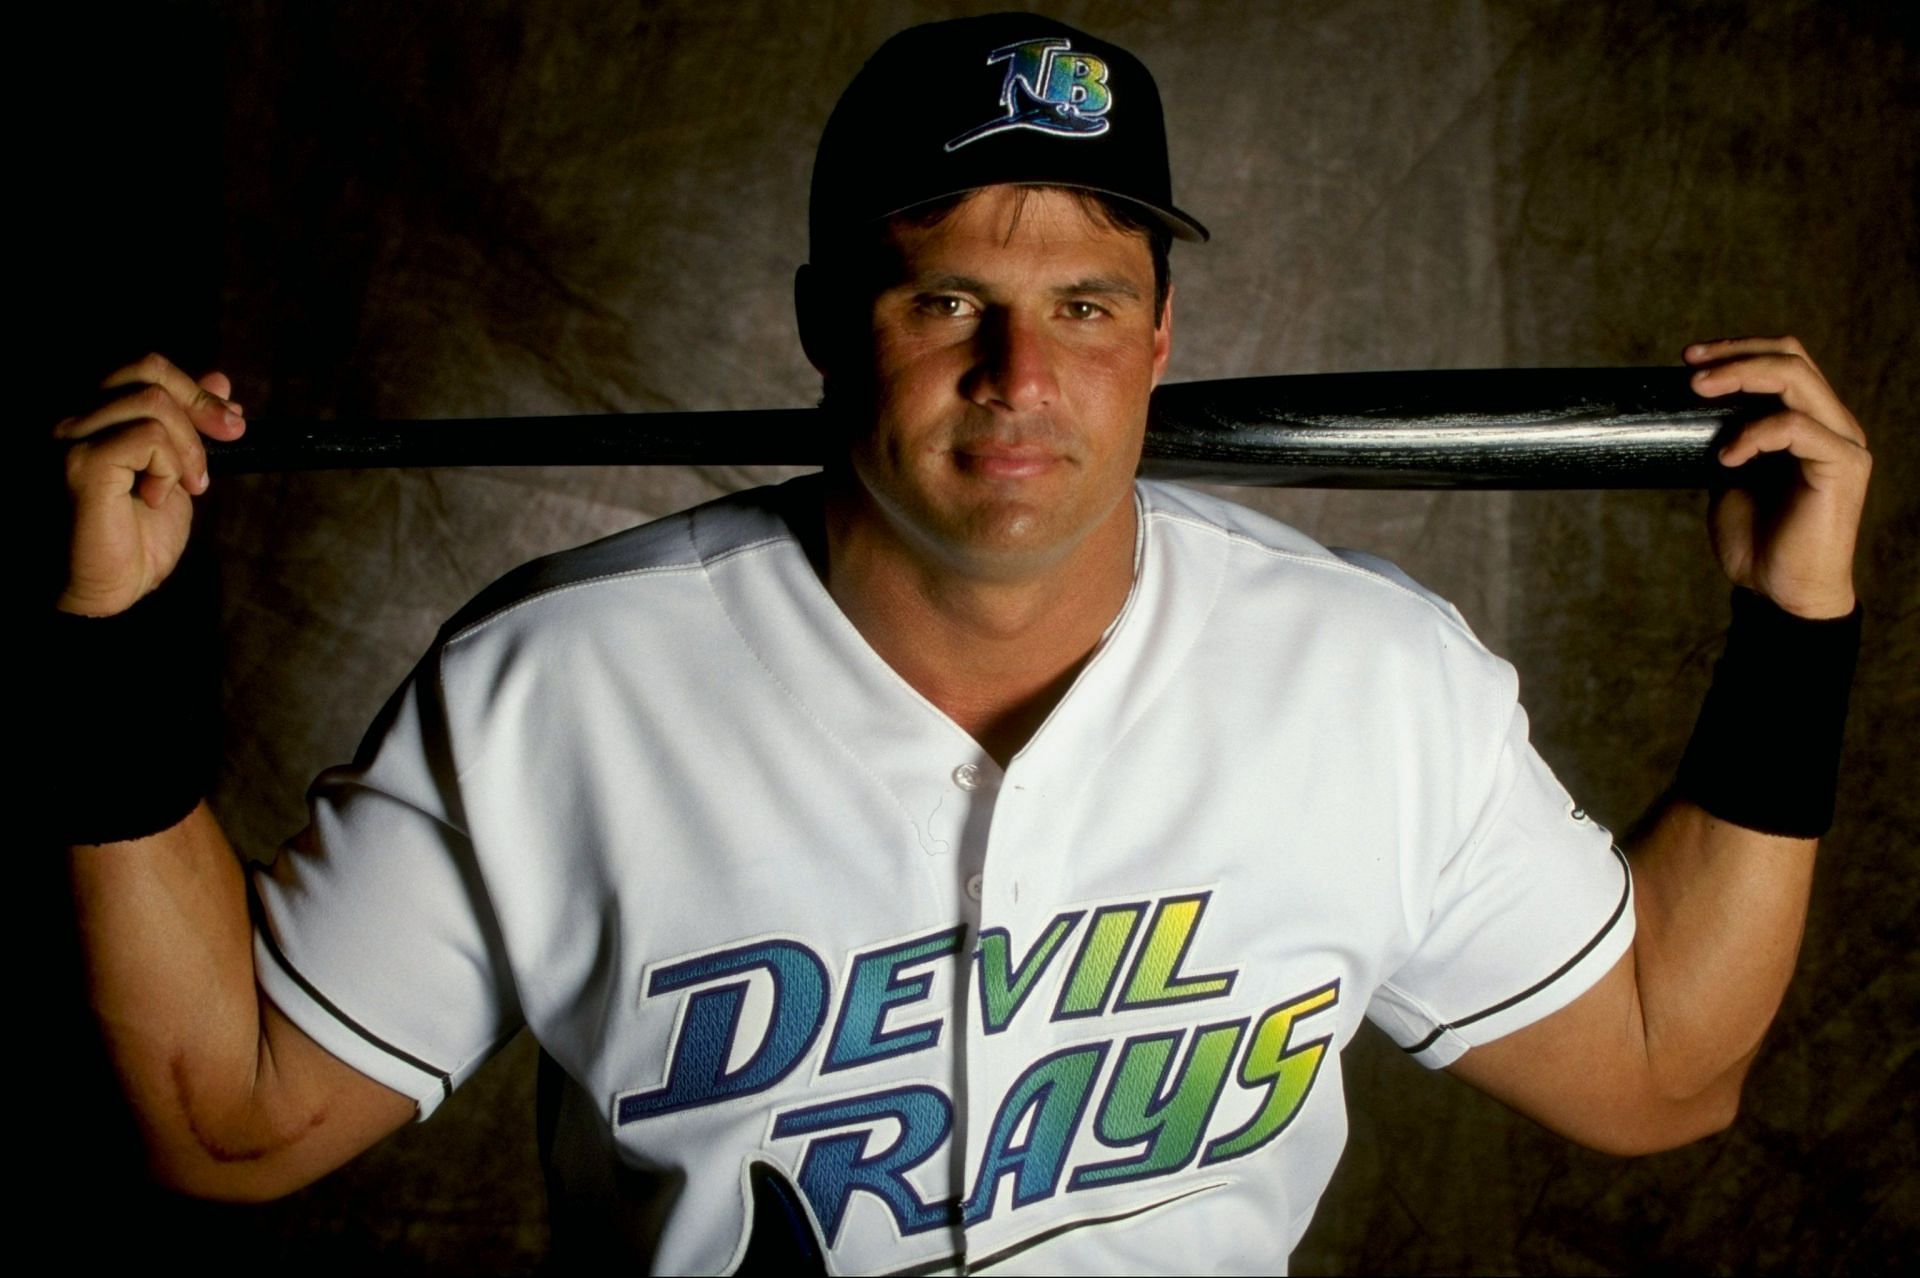 Jose Canseco #33: 25 Feb 1999: Outfielder Jose Canseco (33) of the Tampa Bay Devil Rays poses for a studio portrait on Photo Day during Spring Training at Lang Stadium in St. Petersburg, Florida. Mandatory Credit: Scott Halleran /Allsport